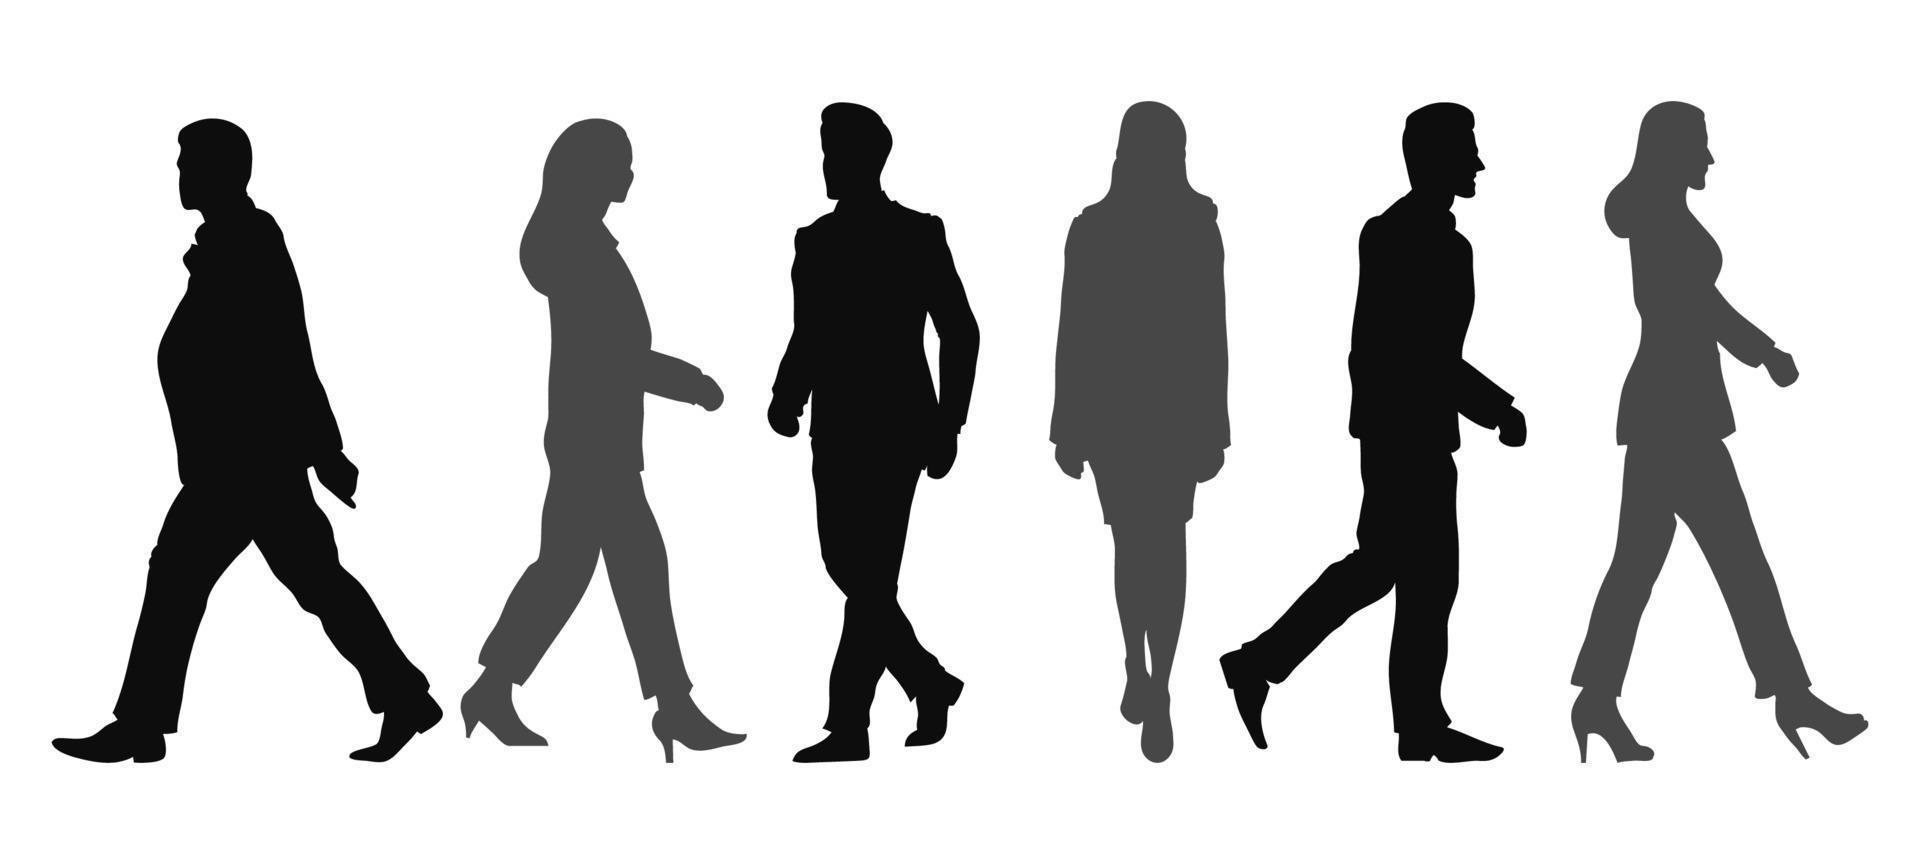 Business People Silhouettes Walks Character Collection vector